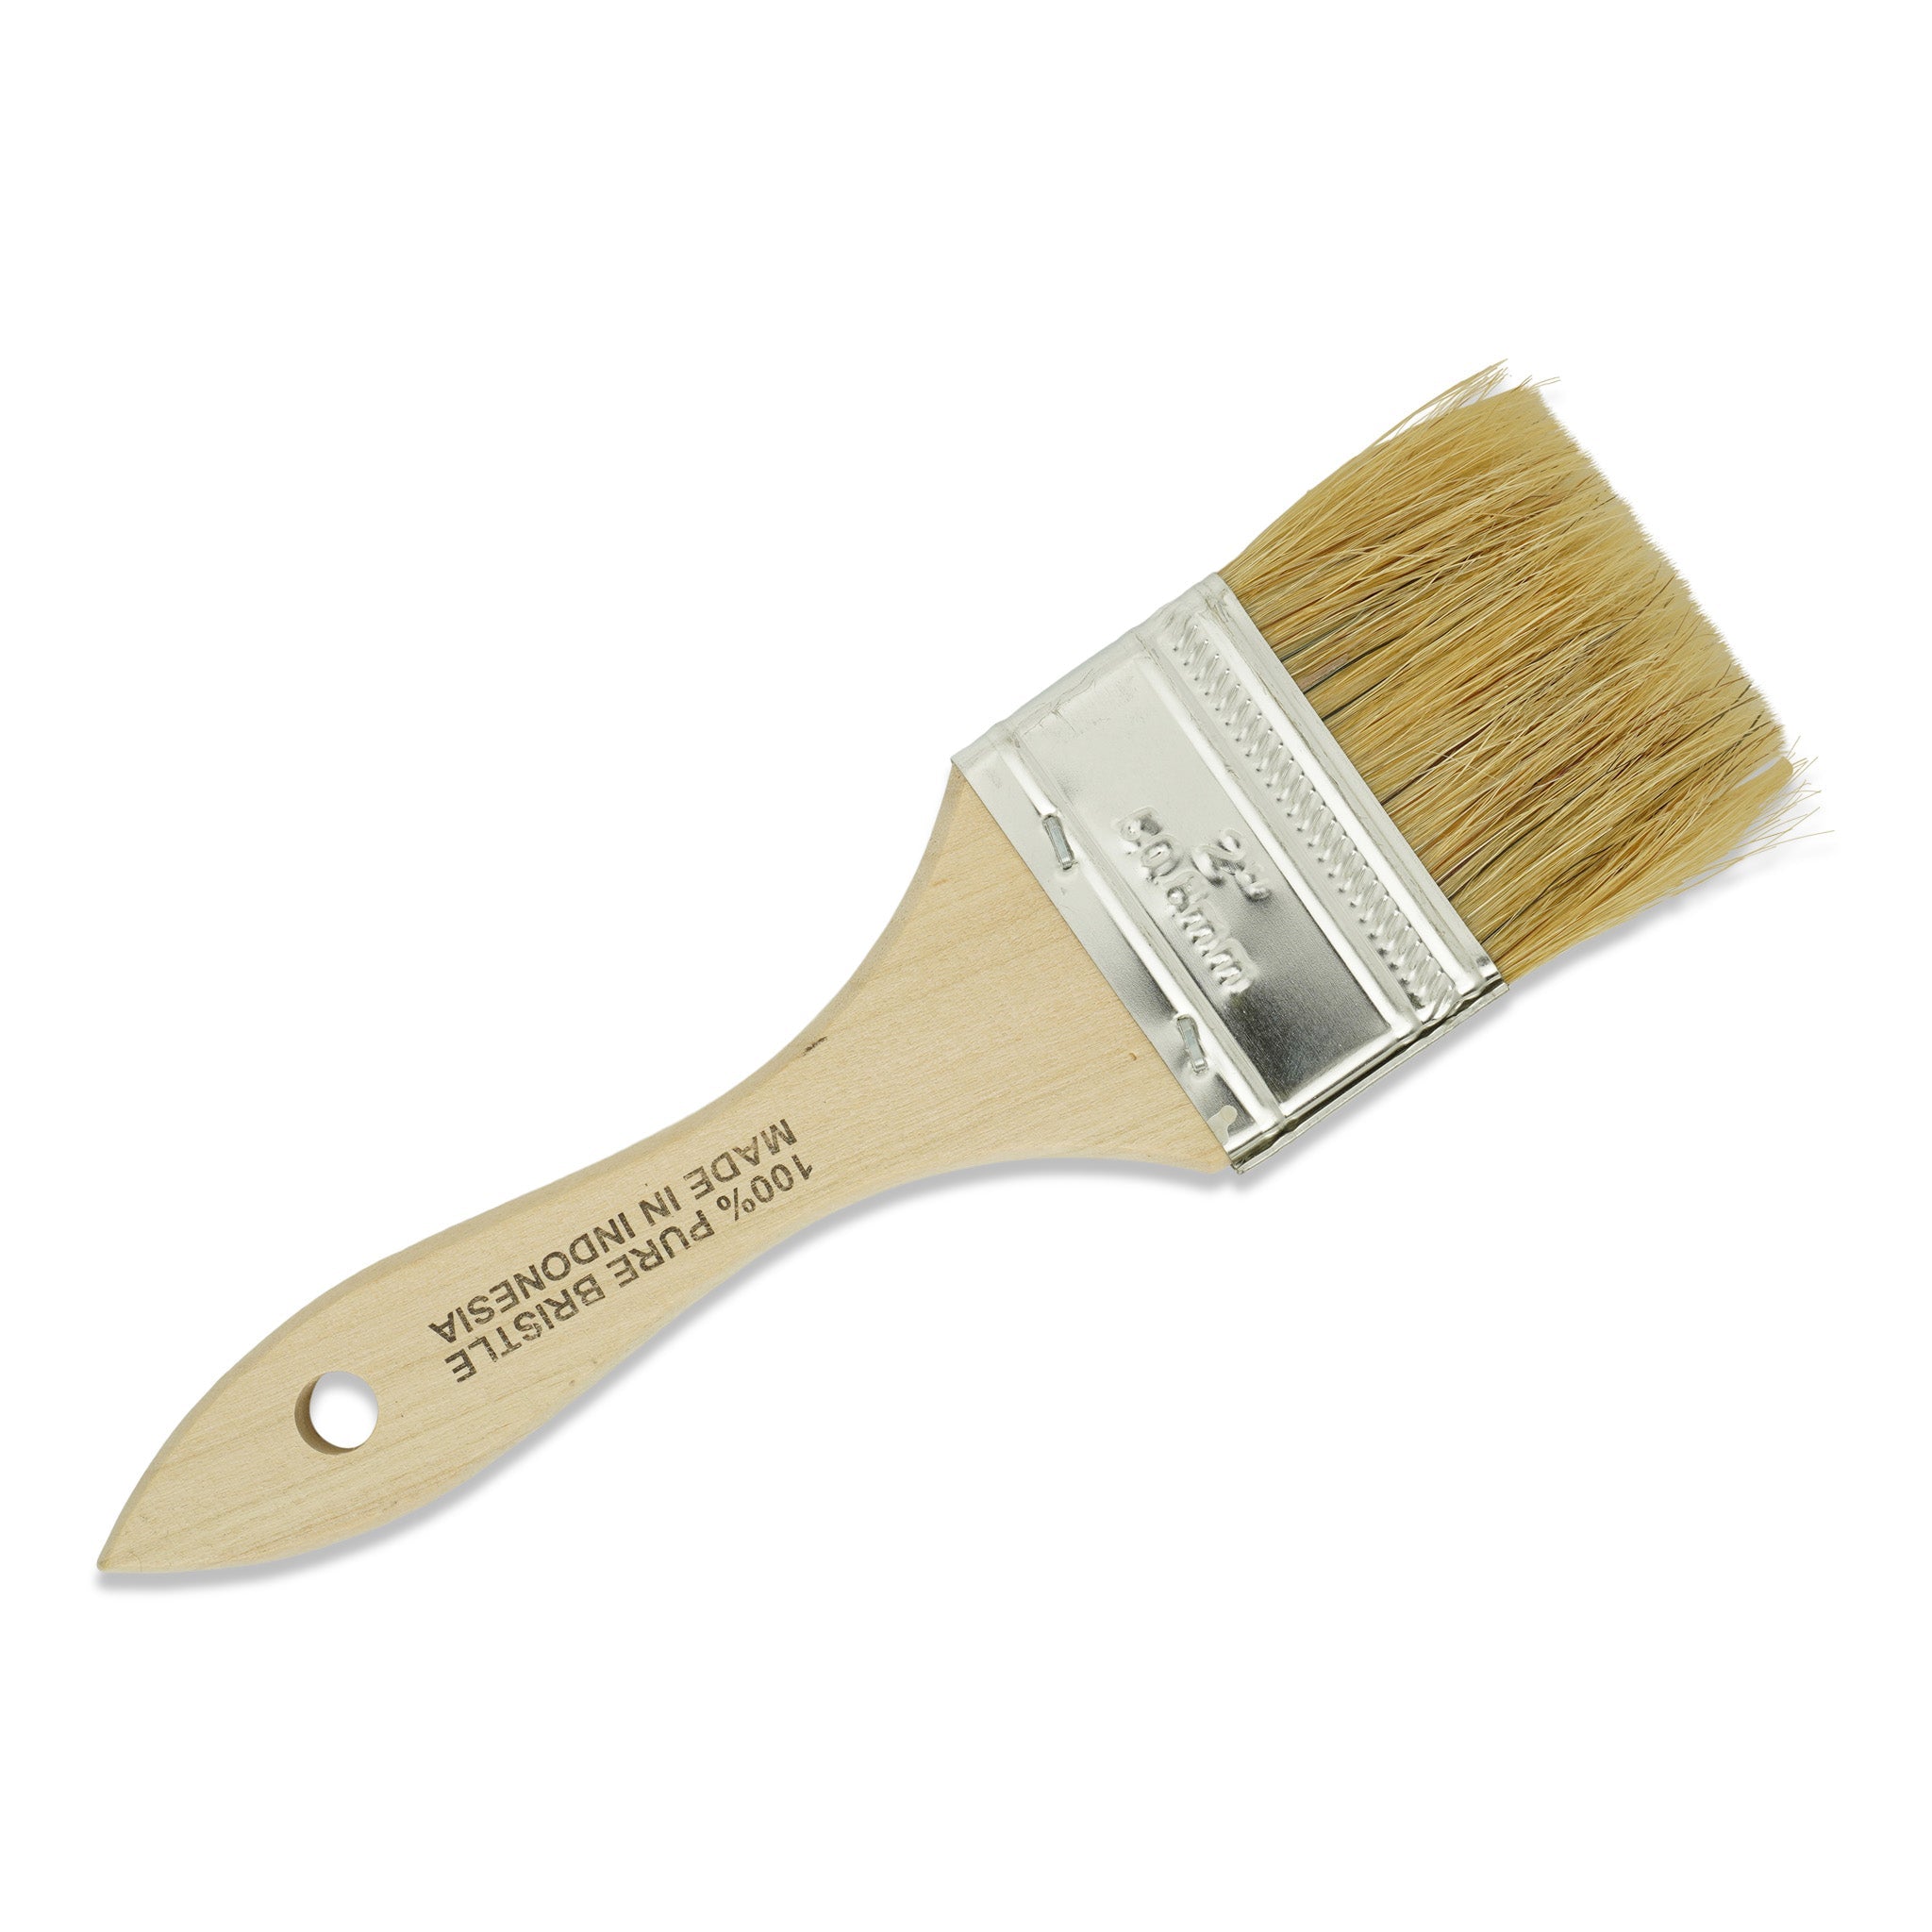 3 T-CLASS DELTA 3 INCH NATURAL BRISTLE PAINT BRUSHES BY HARRIS